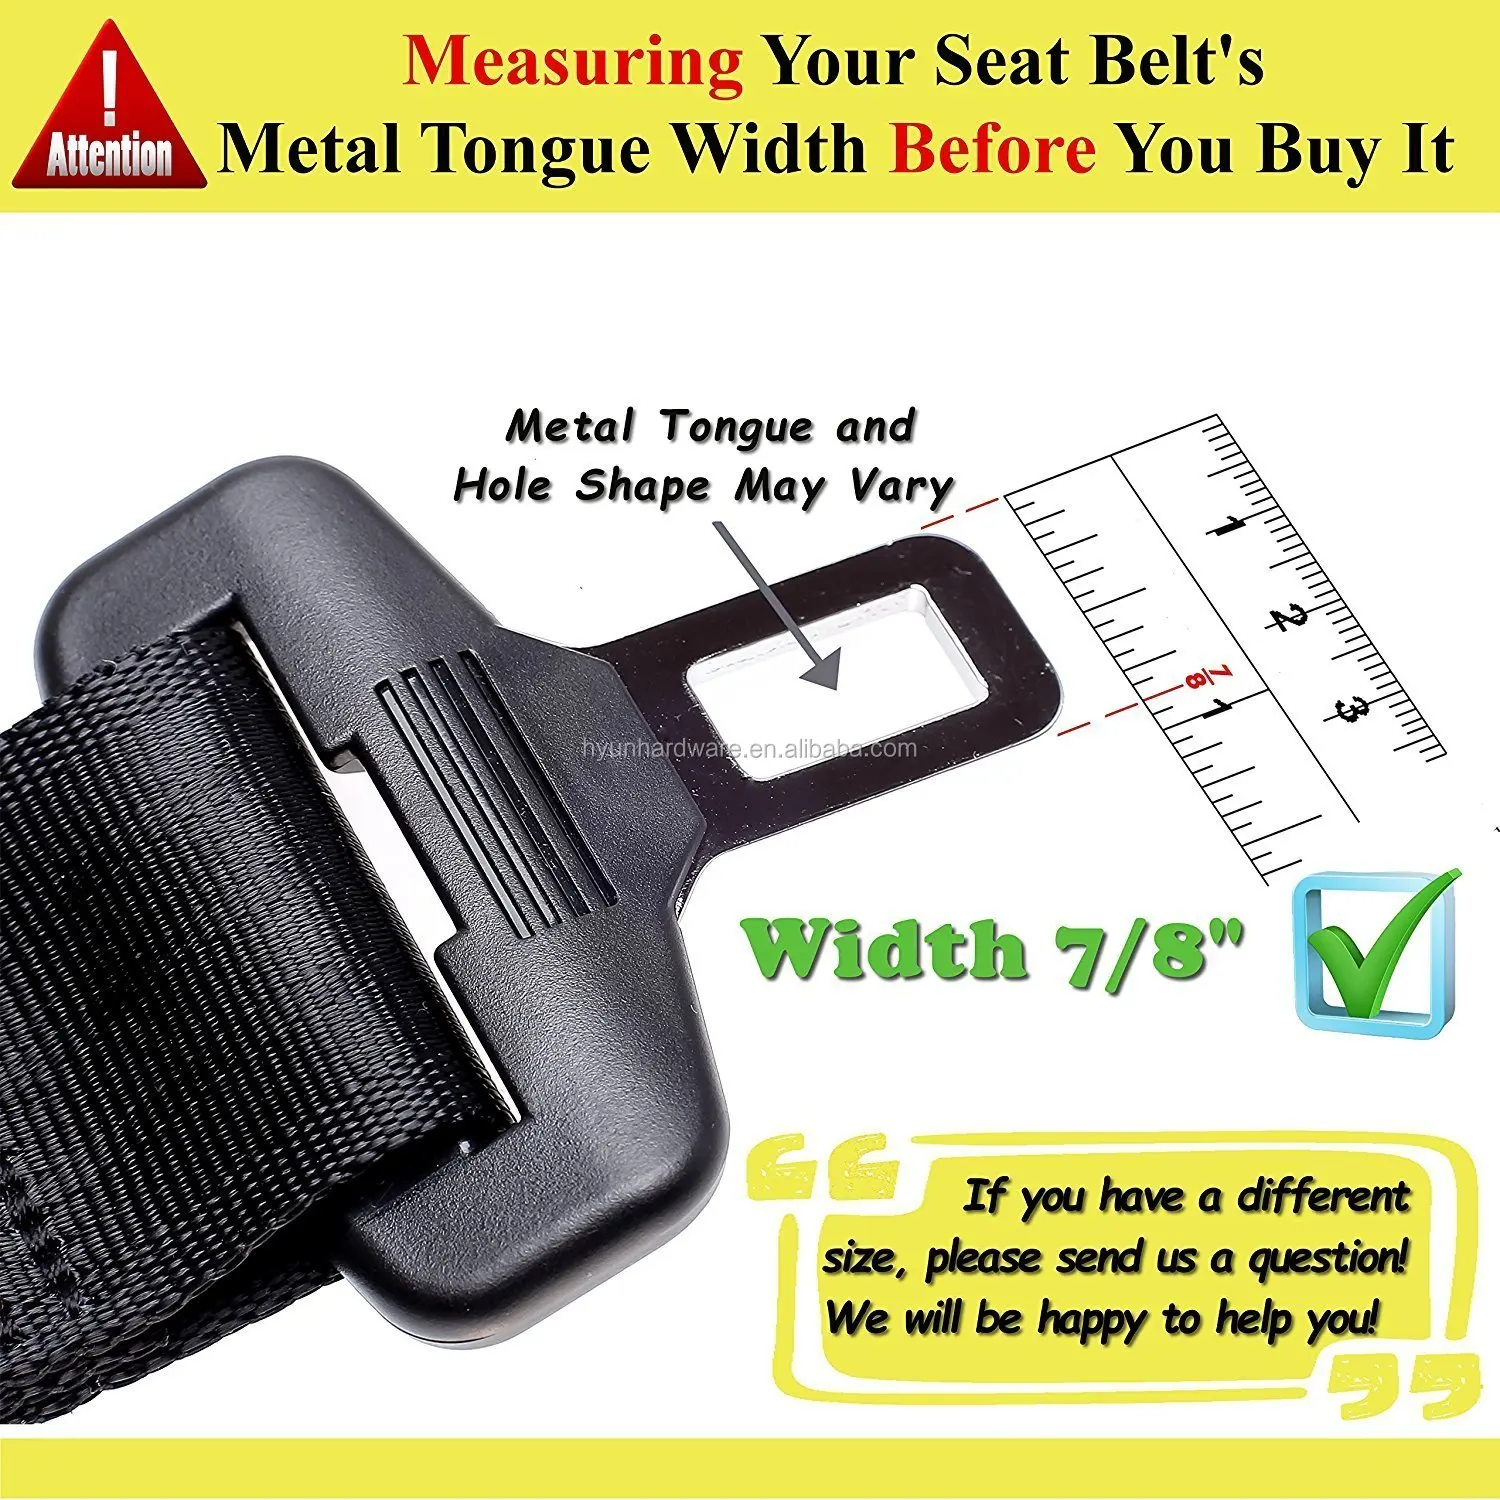 7/8 inches Width Metal Tongue 3 Packs 14.17 Inches Seat Belt Extenders Black Seatbelt Extensions for Obese Men Pregnant Women Child Safety Seats 